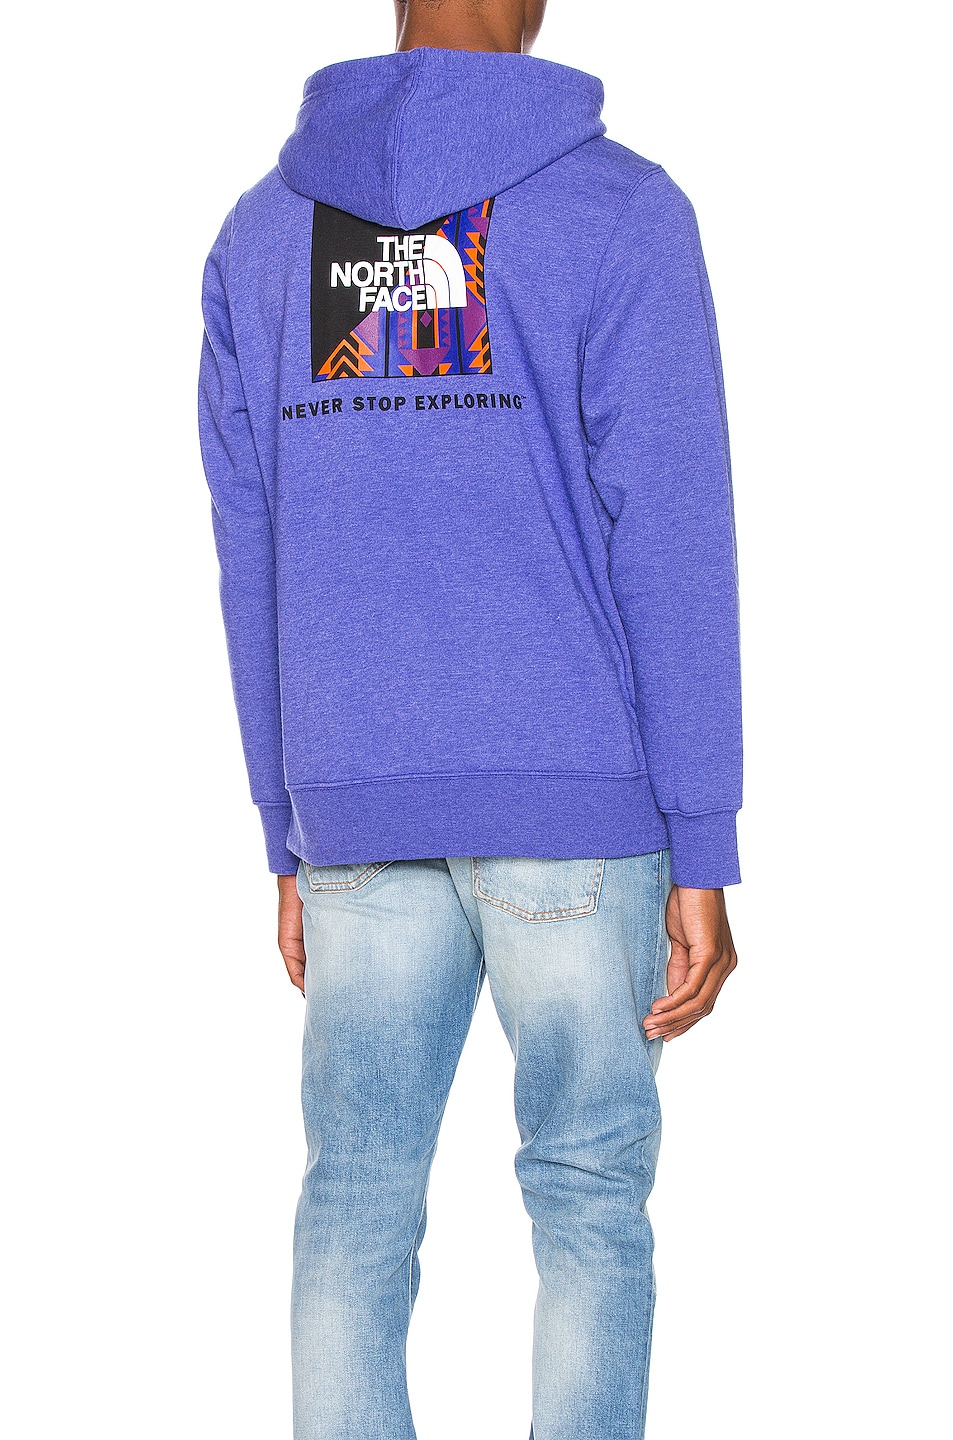 Image 1 of The North Face Black Rage Red Box Pullover Hoodie in Aztec Blue Heather & Aztec BL1992 Rage